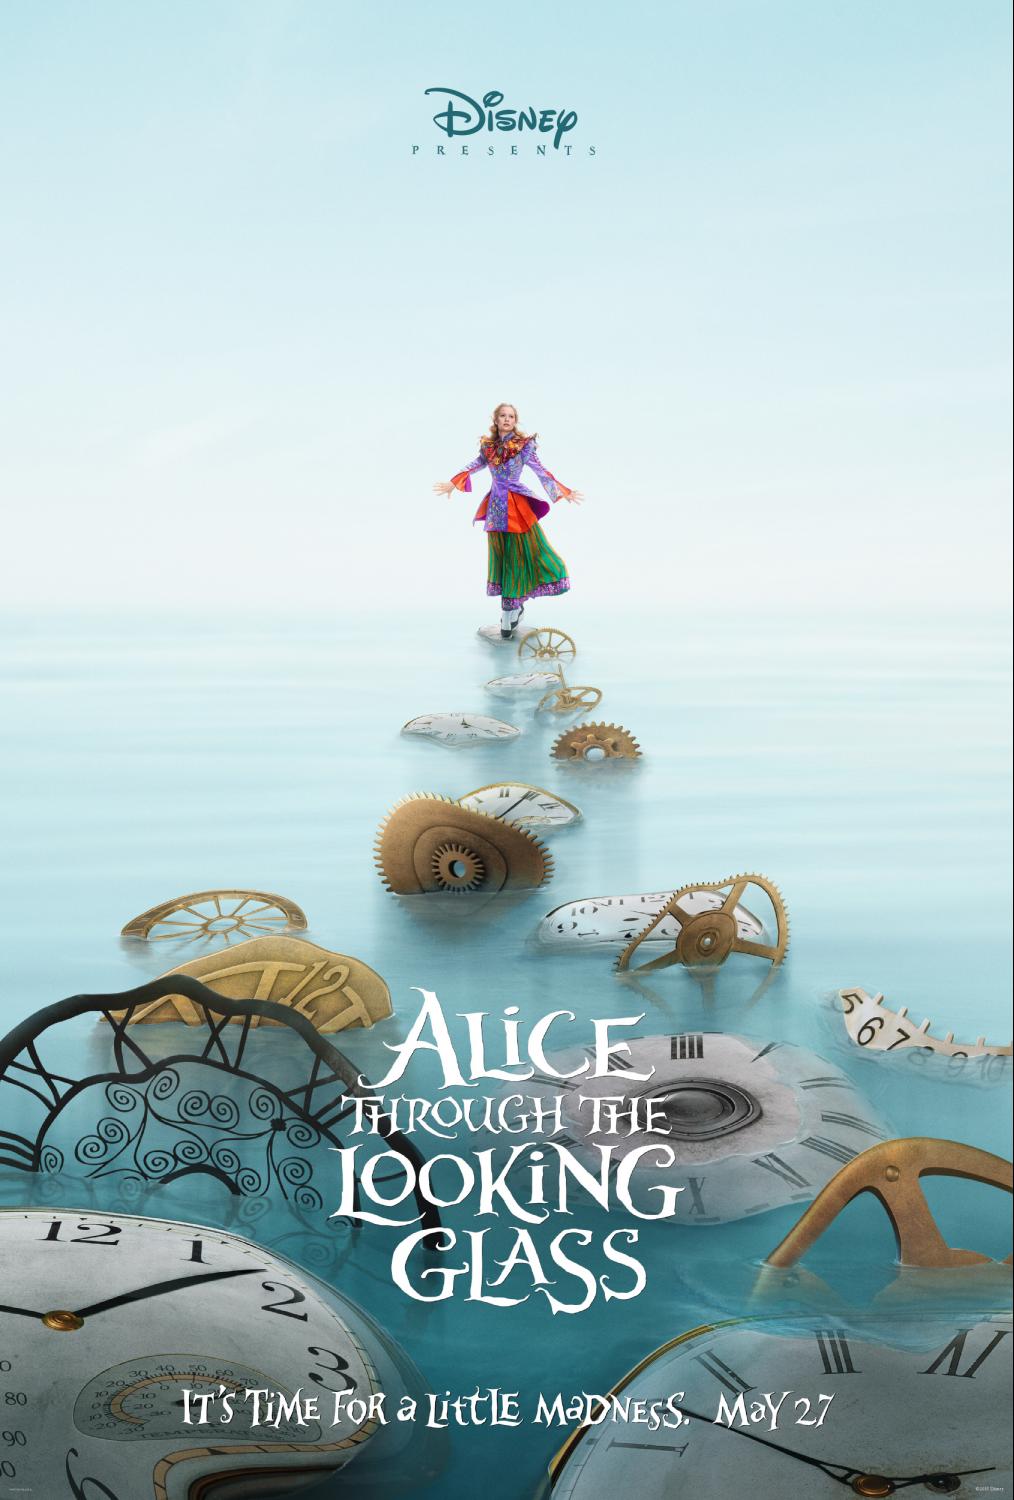 Alice Through The Looking Glass Teaser Trailer JUST Released #DisneyAlice